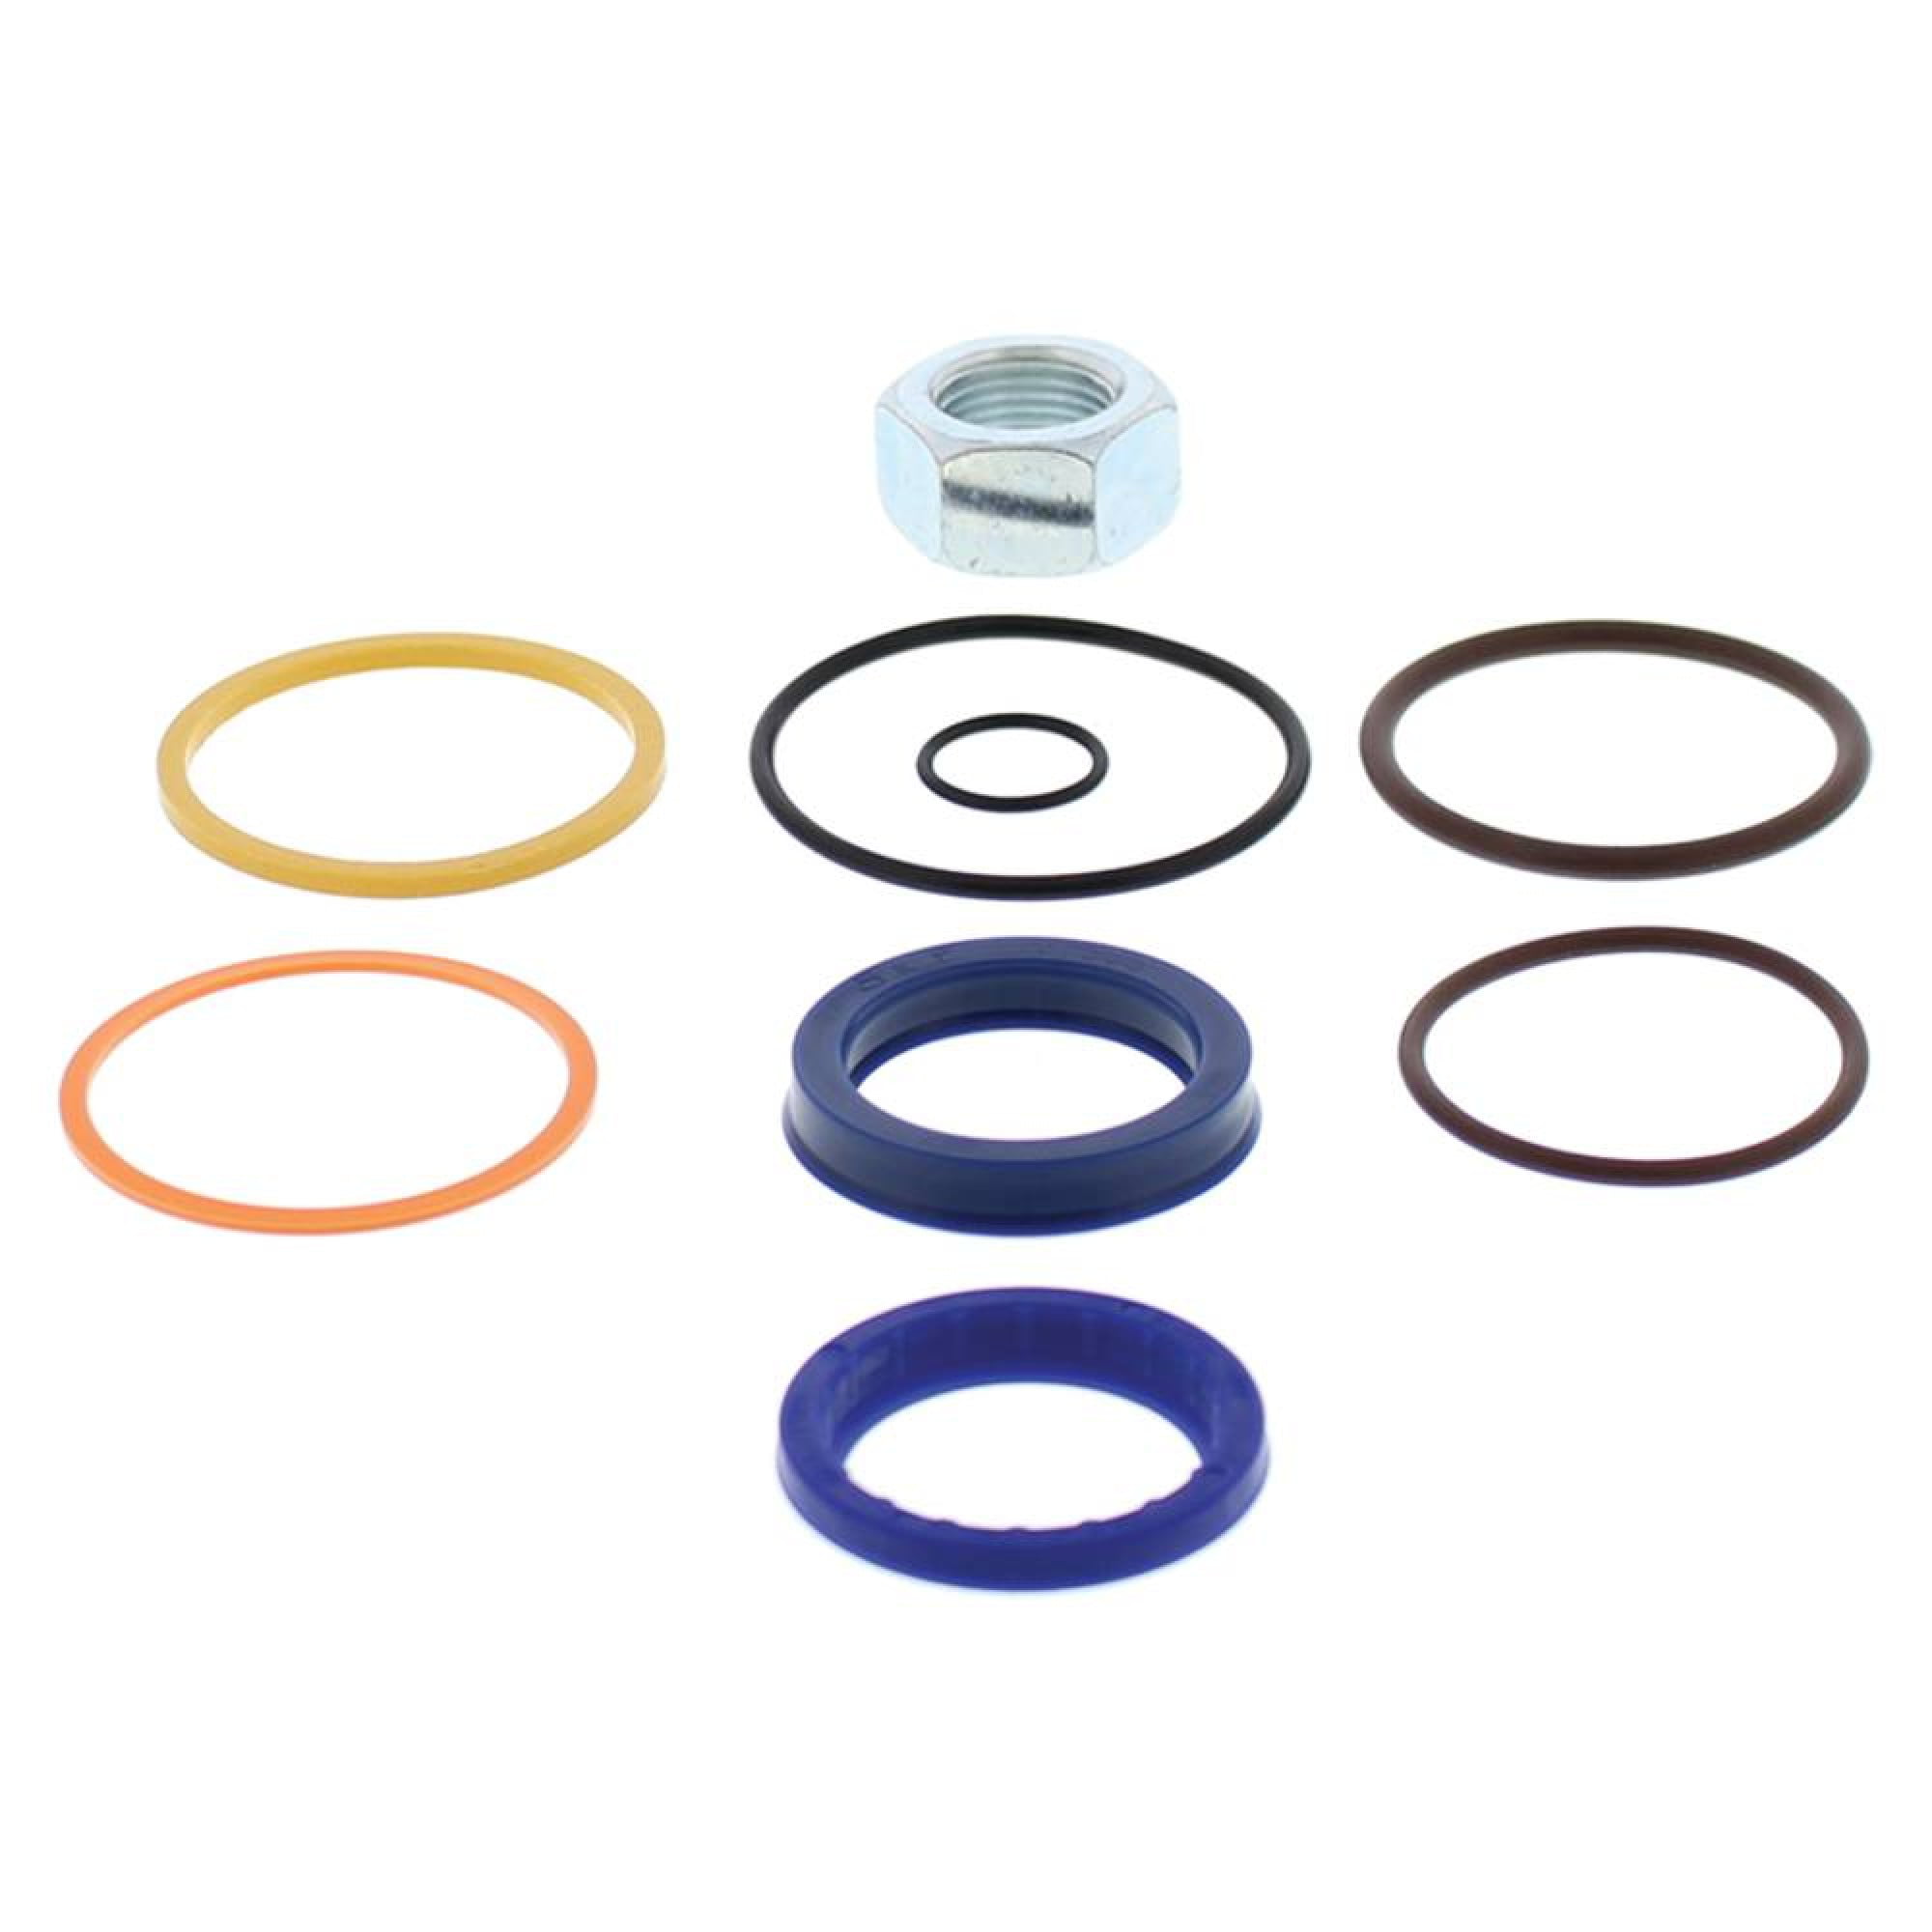 6803329 Skid Steer Lift Hydraulic Cylinder Seal Kit for Bobcat 444 500 642 